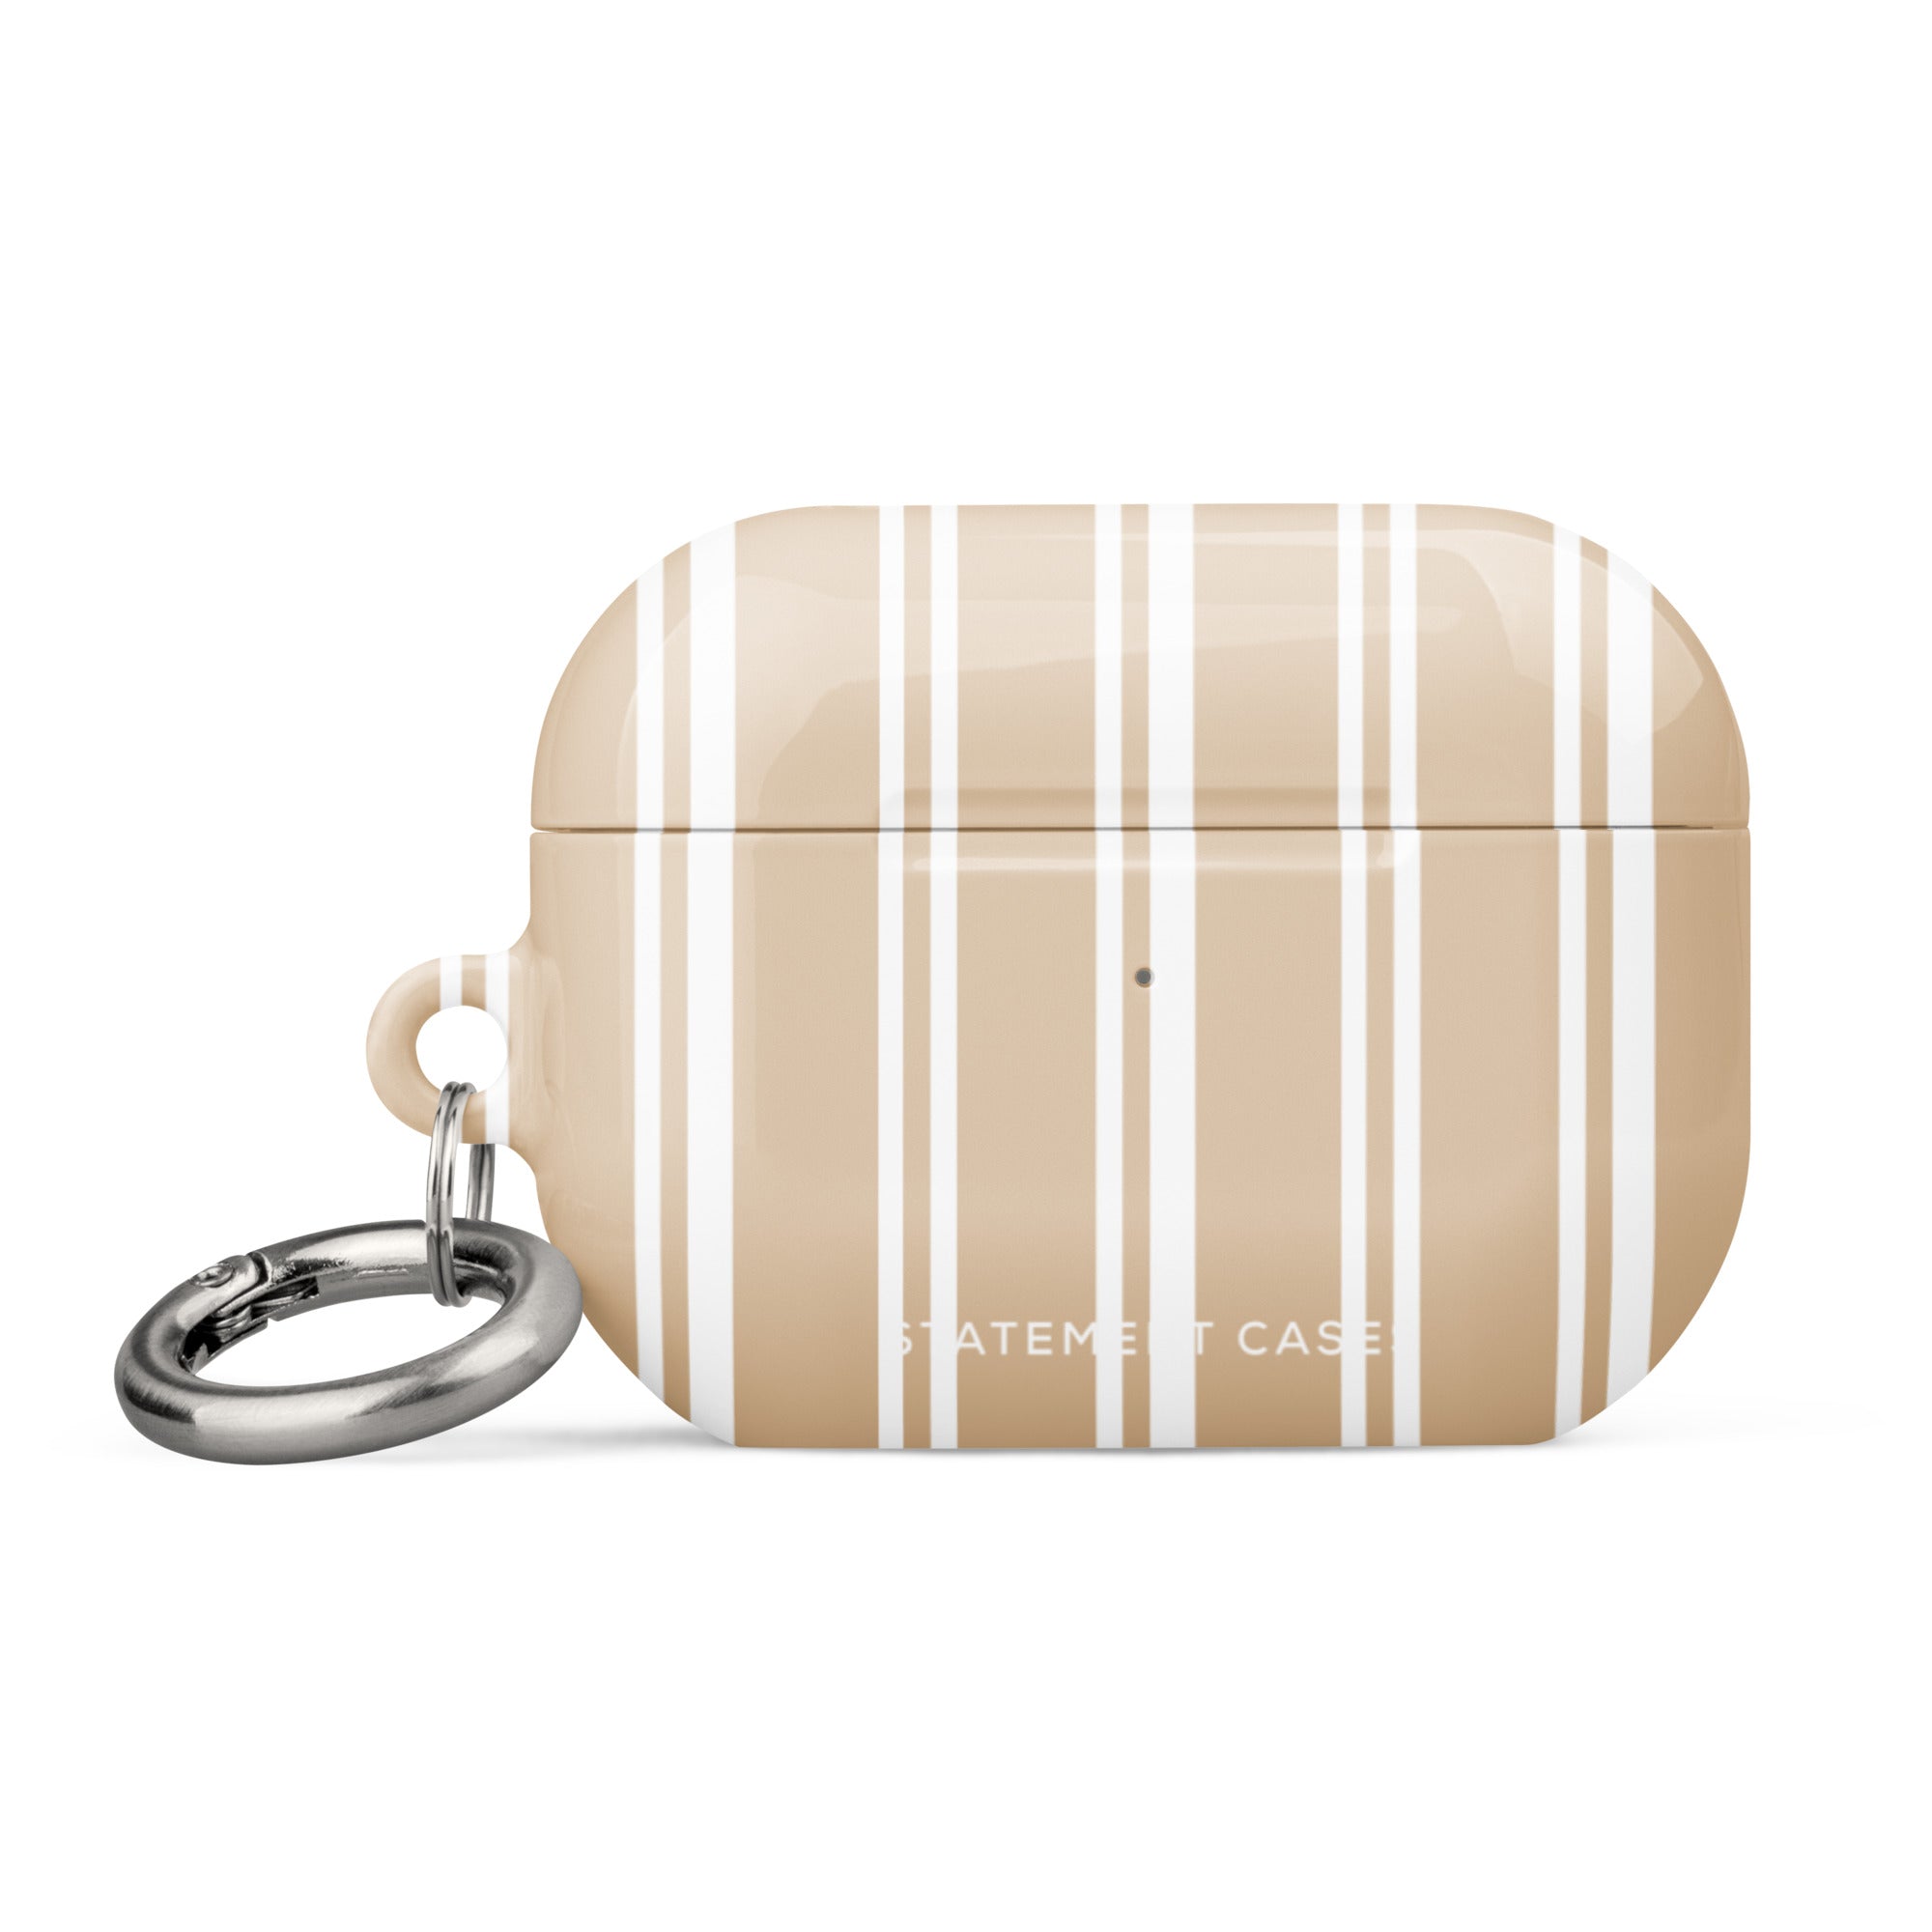 A beige Estate Stripe for AirPods Pro Gen 2 by Statement Cases with vertical white stripes is shown. It has a metal carabiner attached to the left side, enhancing convenience and durability. The impact-absorbing case displays the text "STATEMENT CASE" on the front.